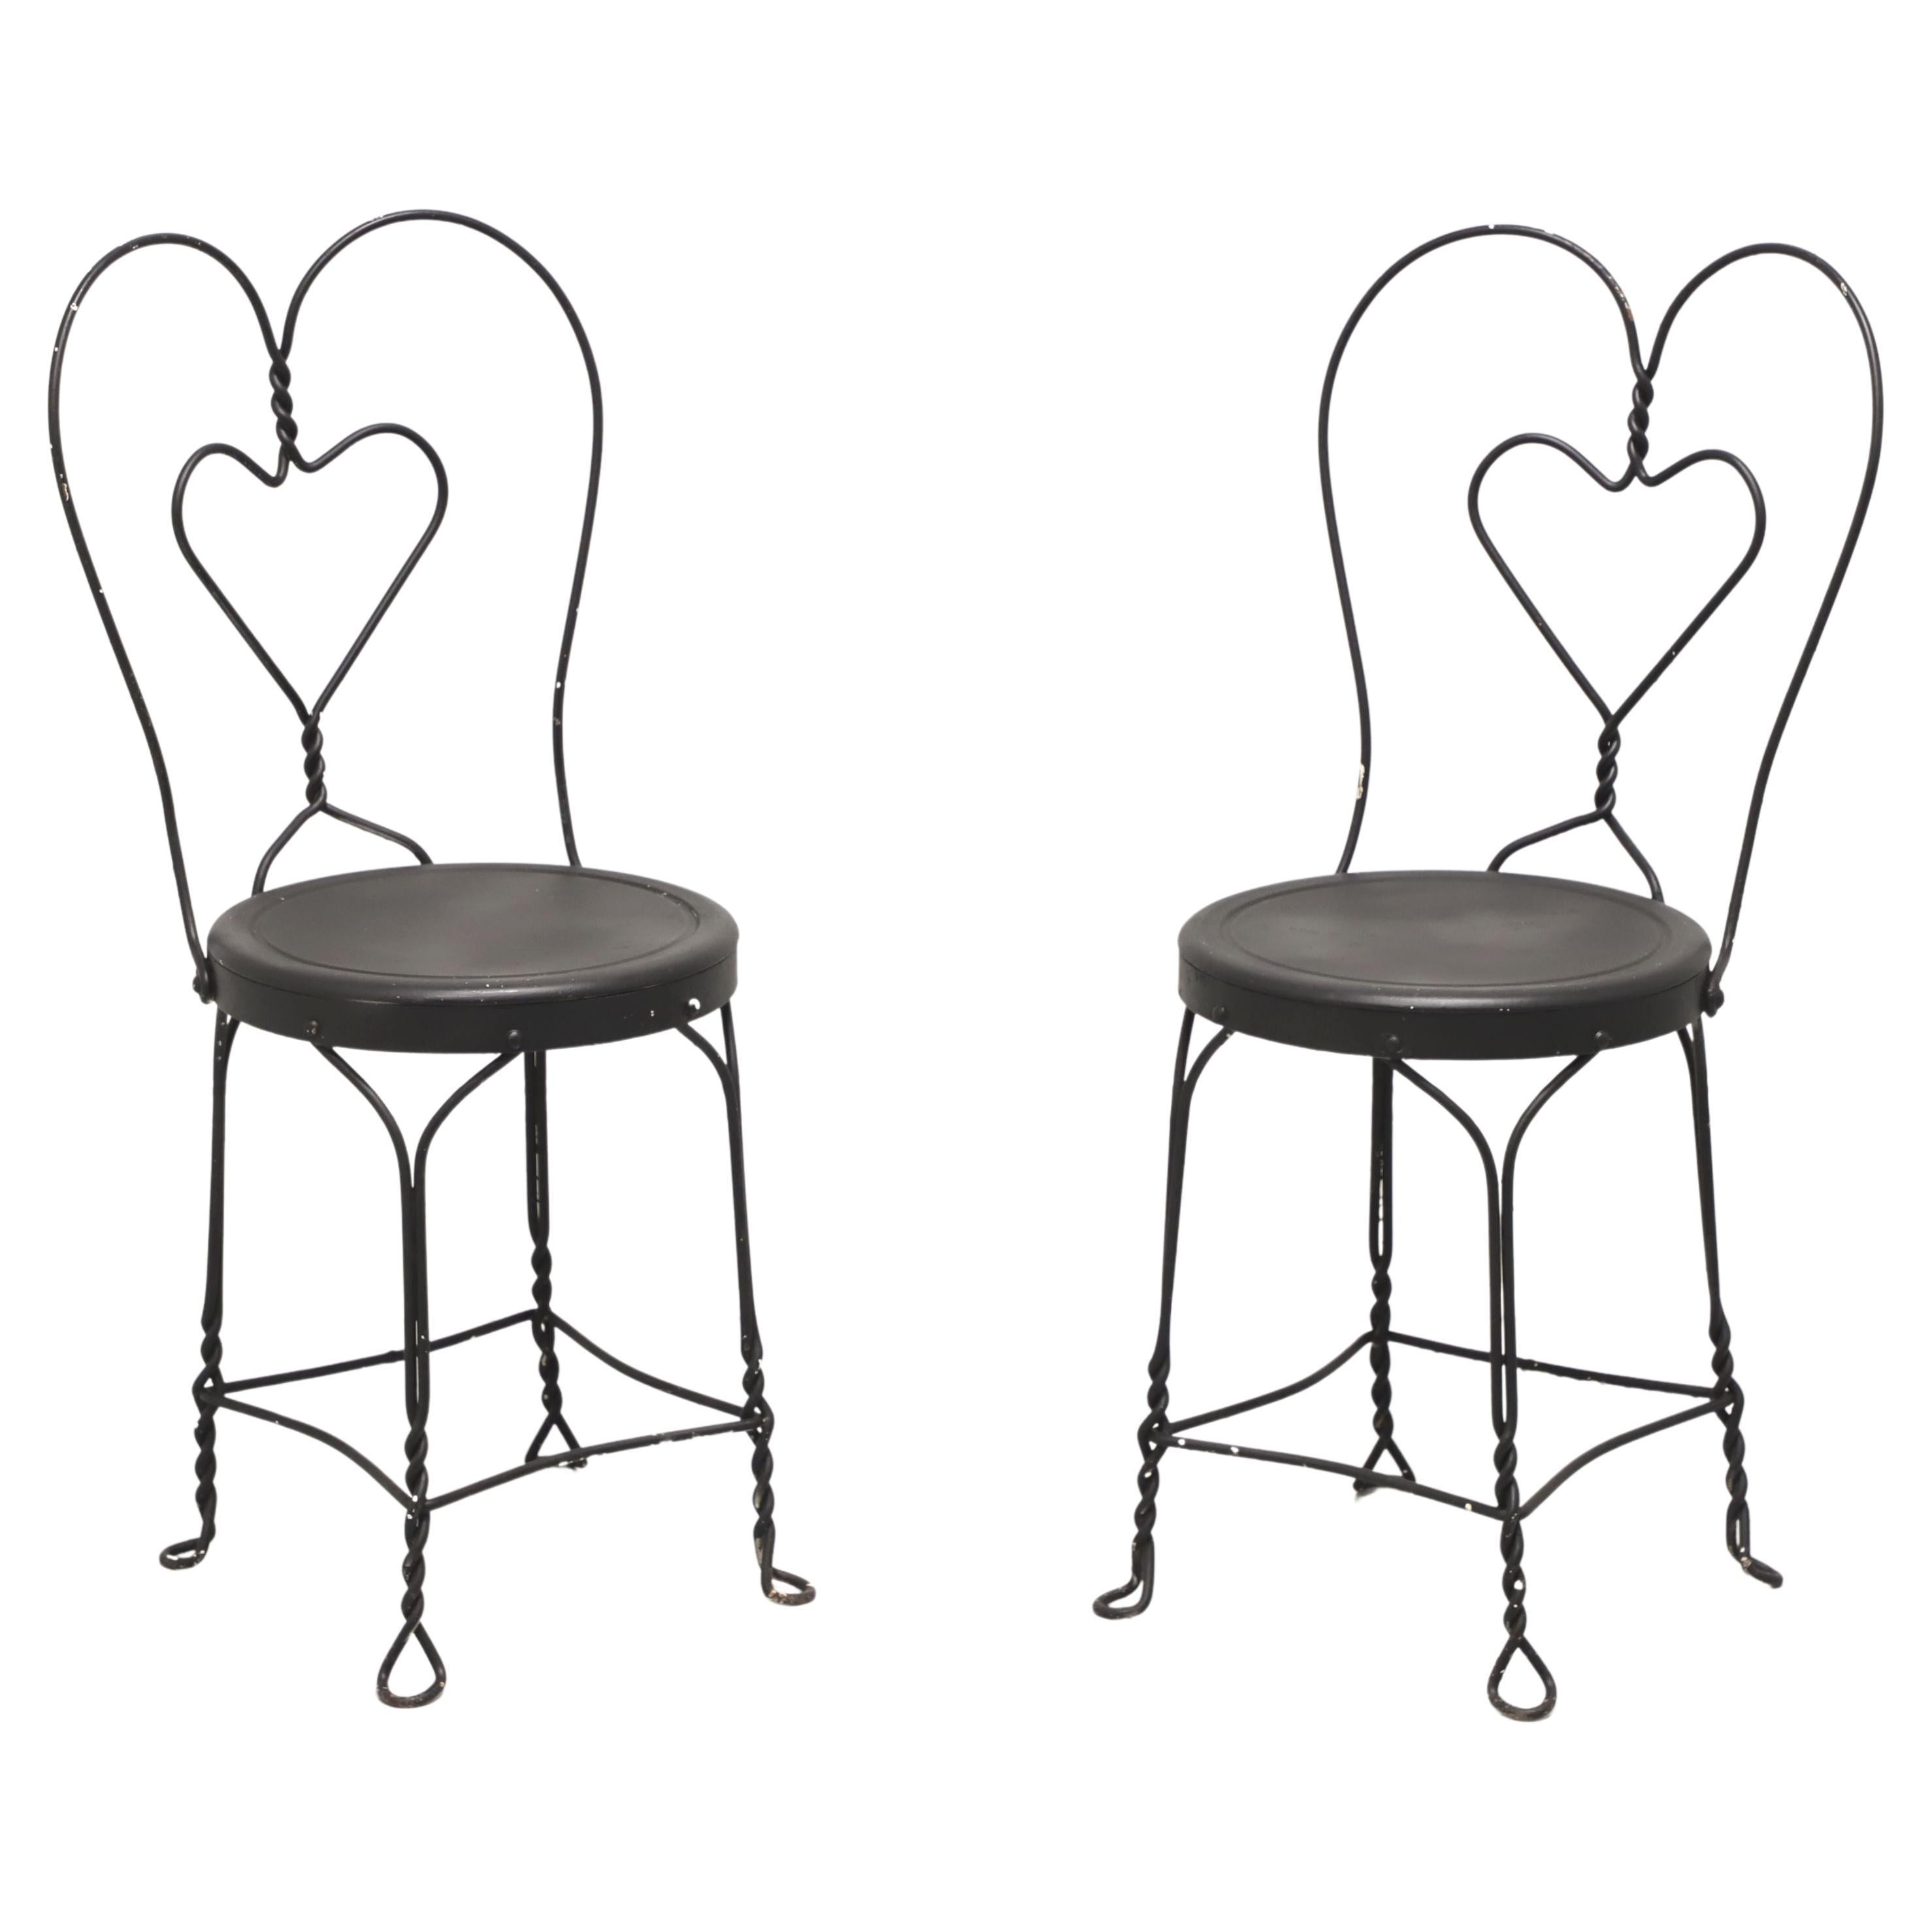 Wrought Iron Mid 20th Century Ice Cream Parlor / Bistro Chairs - Pair